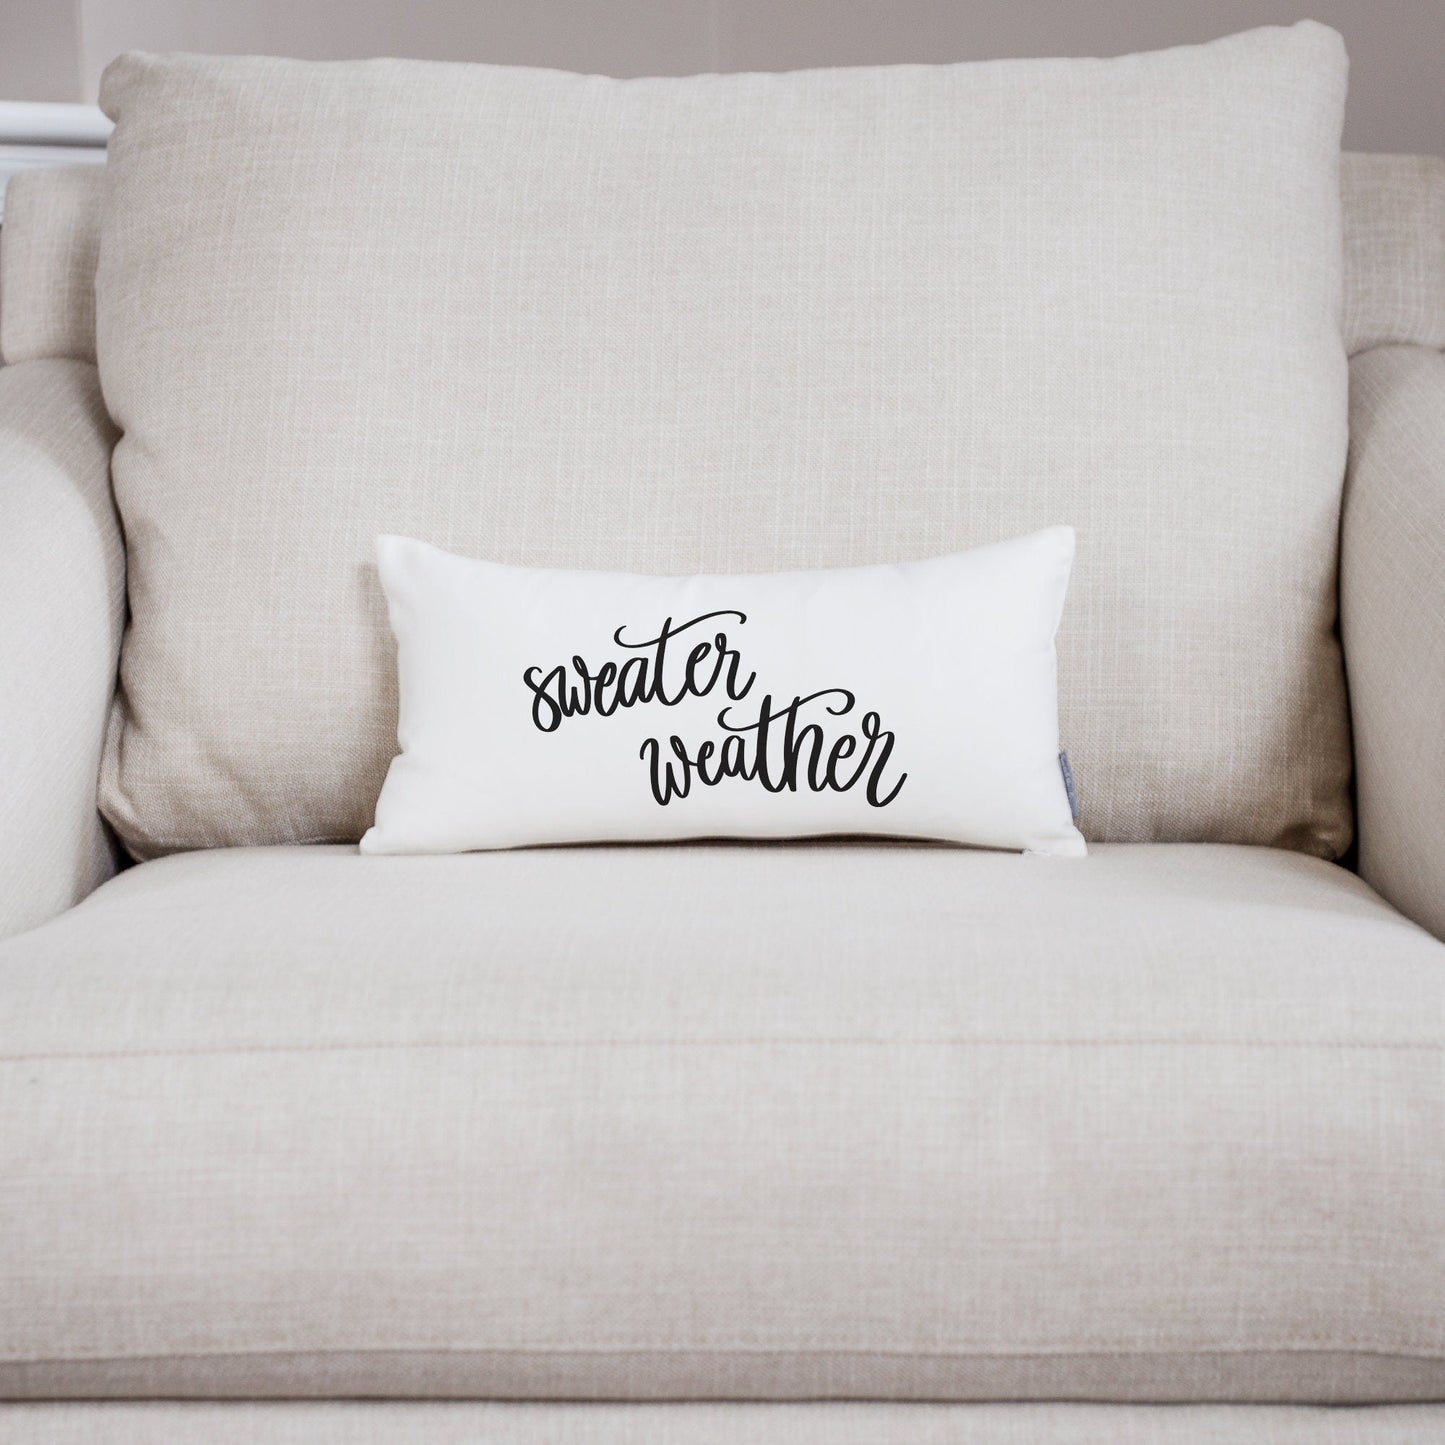 Sweater Weather Pillow | Fall Decor Pillow | Rustic Fall Decor | Farmhouse Decor | Winter Decor | Decorative Pillow | Baby It's Cold Outside - Sweet Hooligans Design